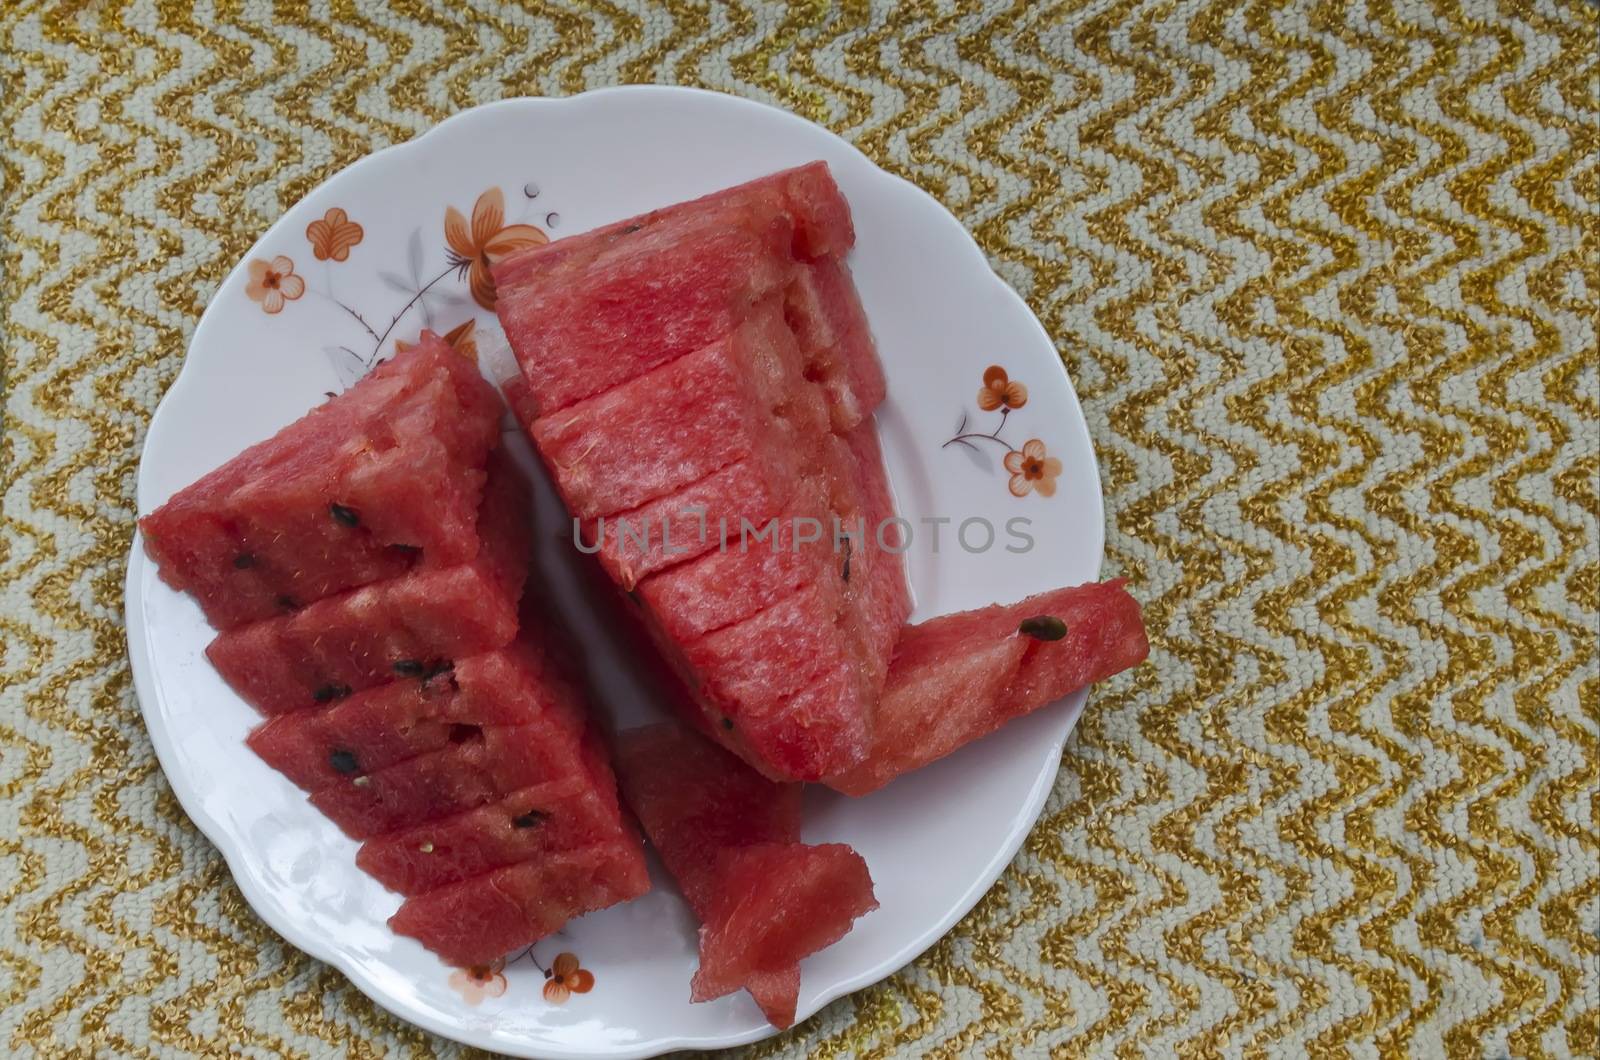 Slices of juicy watermelon arranged on a plate by vili45